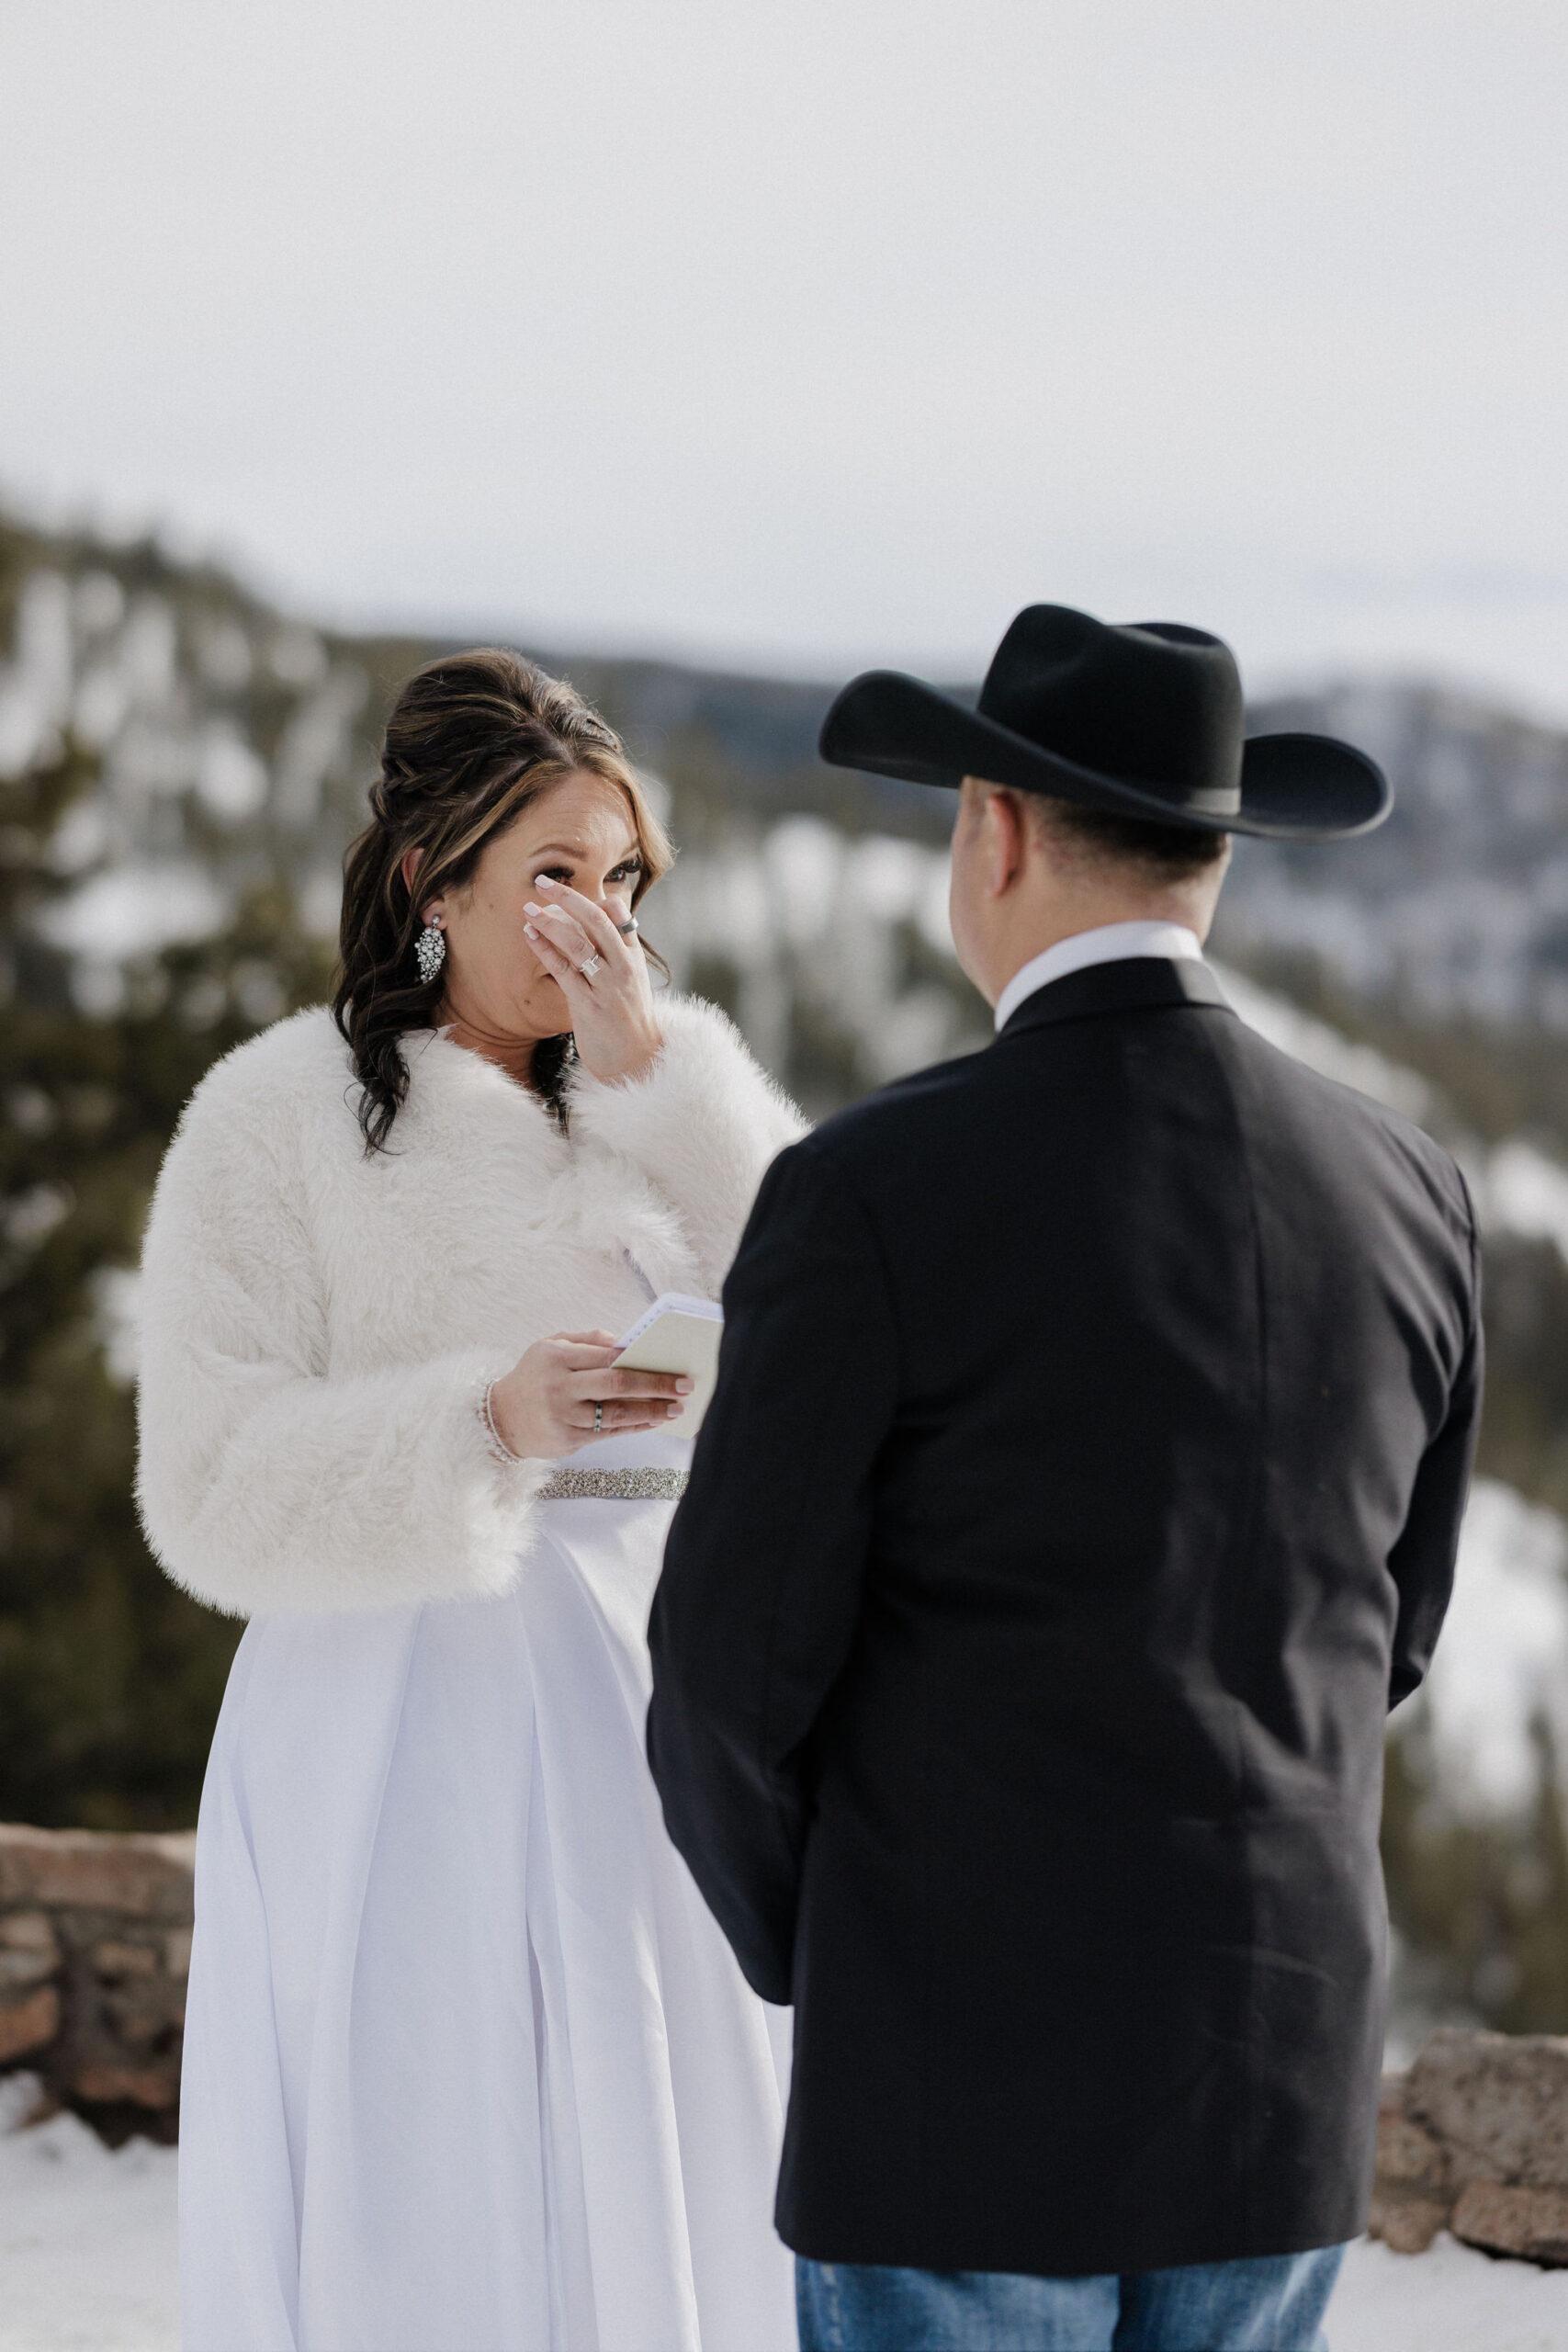 Bride and groom say wedding vows during self-solemnizing colorado elopement